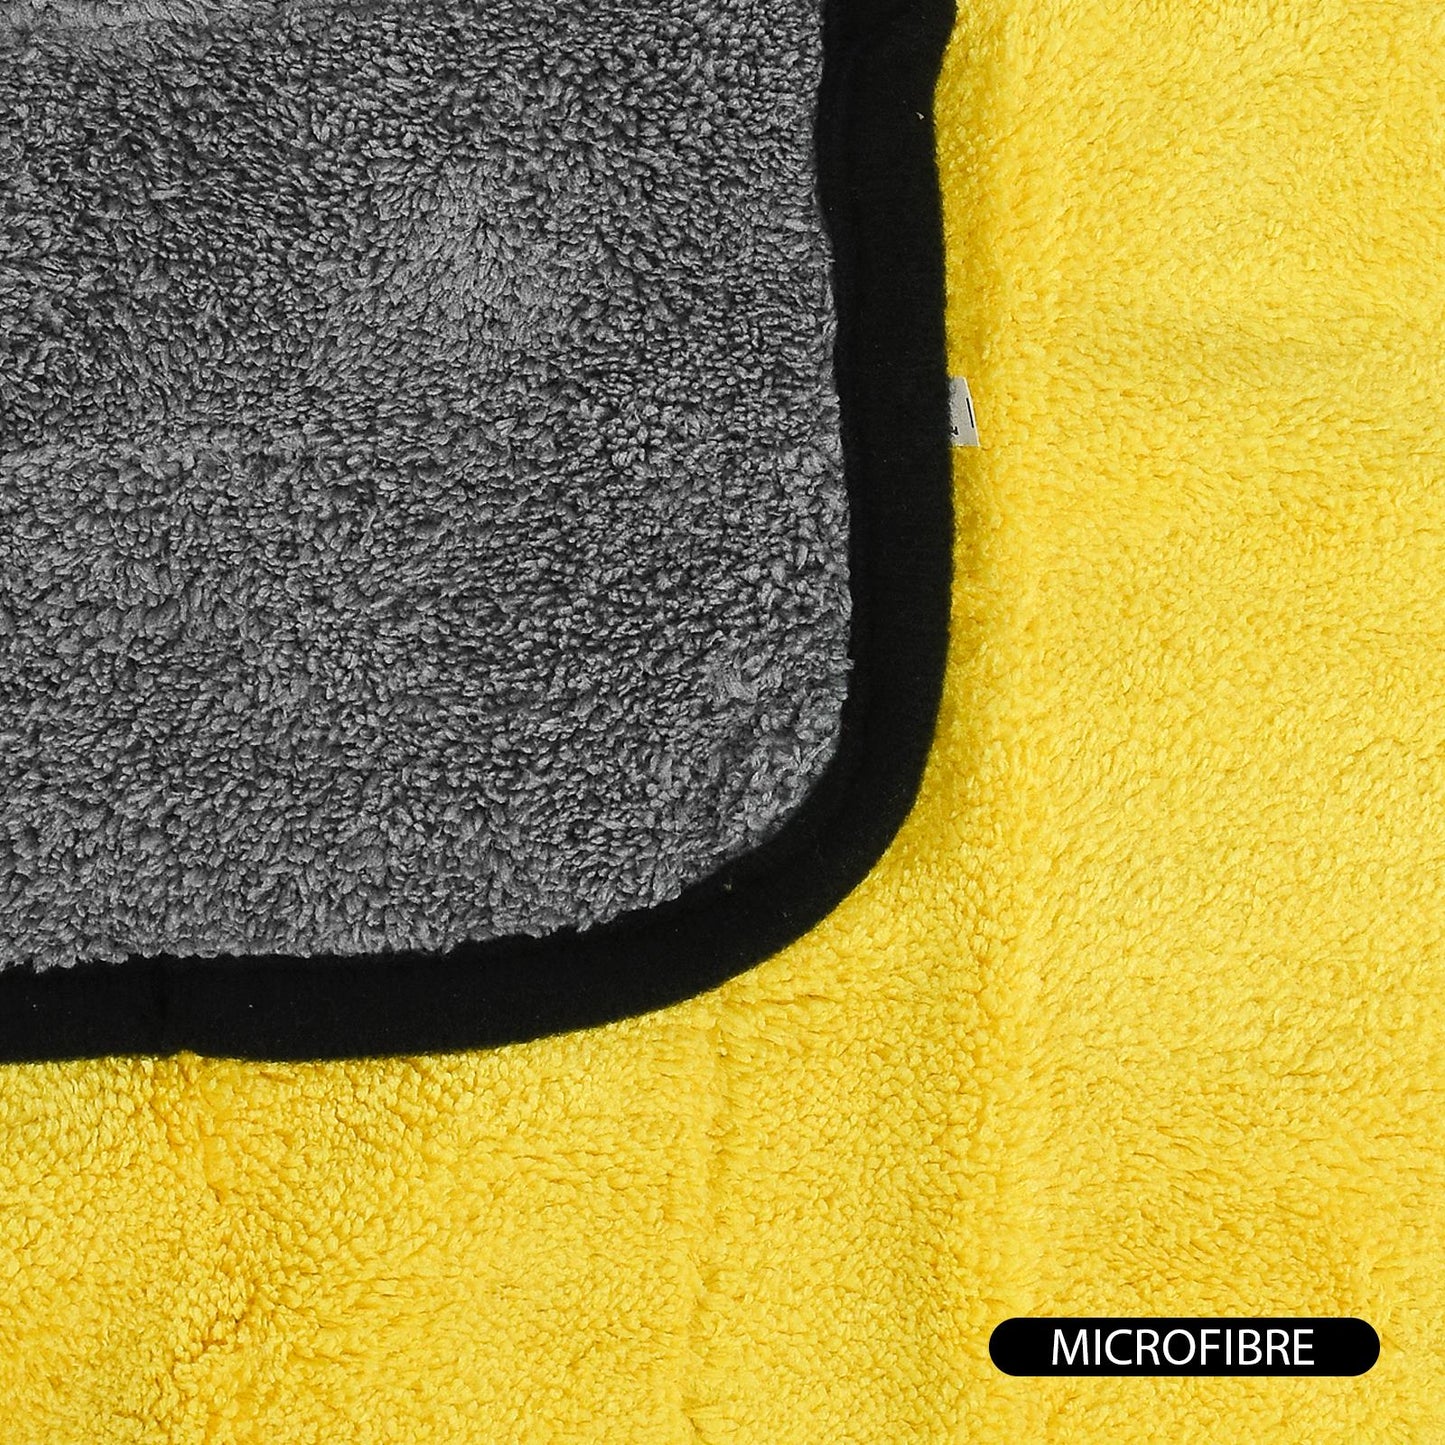 Ultra-Soft Microfiber Towel For Car Buffing And Detailing